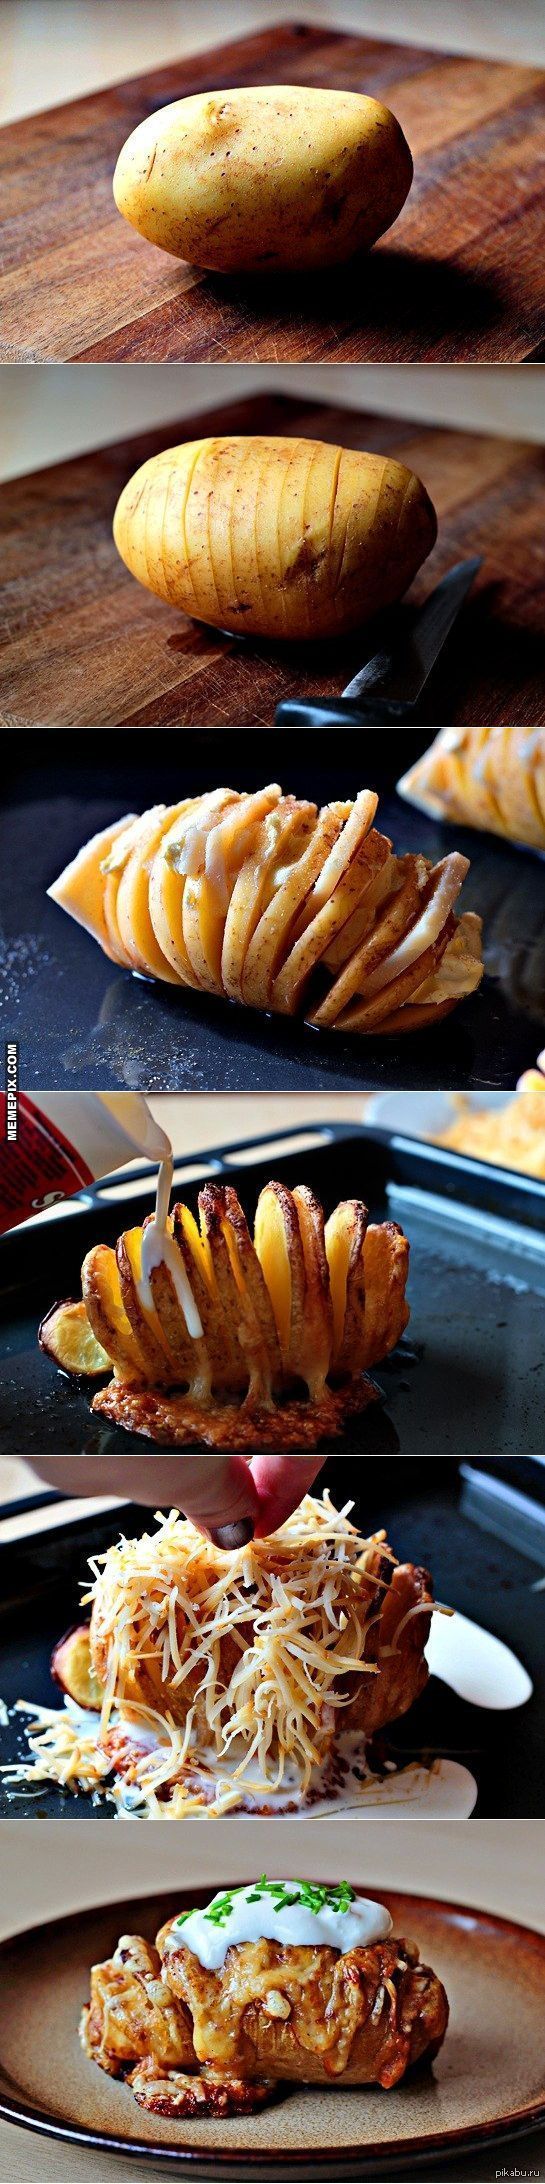 The perfect baked potato. How to make… -rinse and scrub potatoes -cut into thi